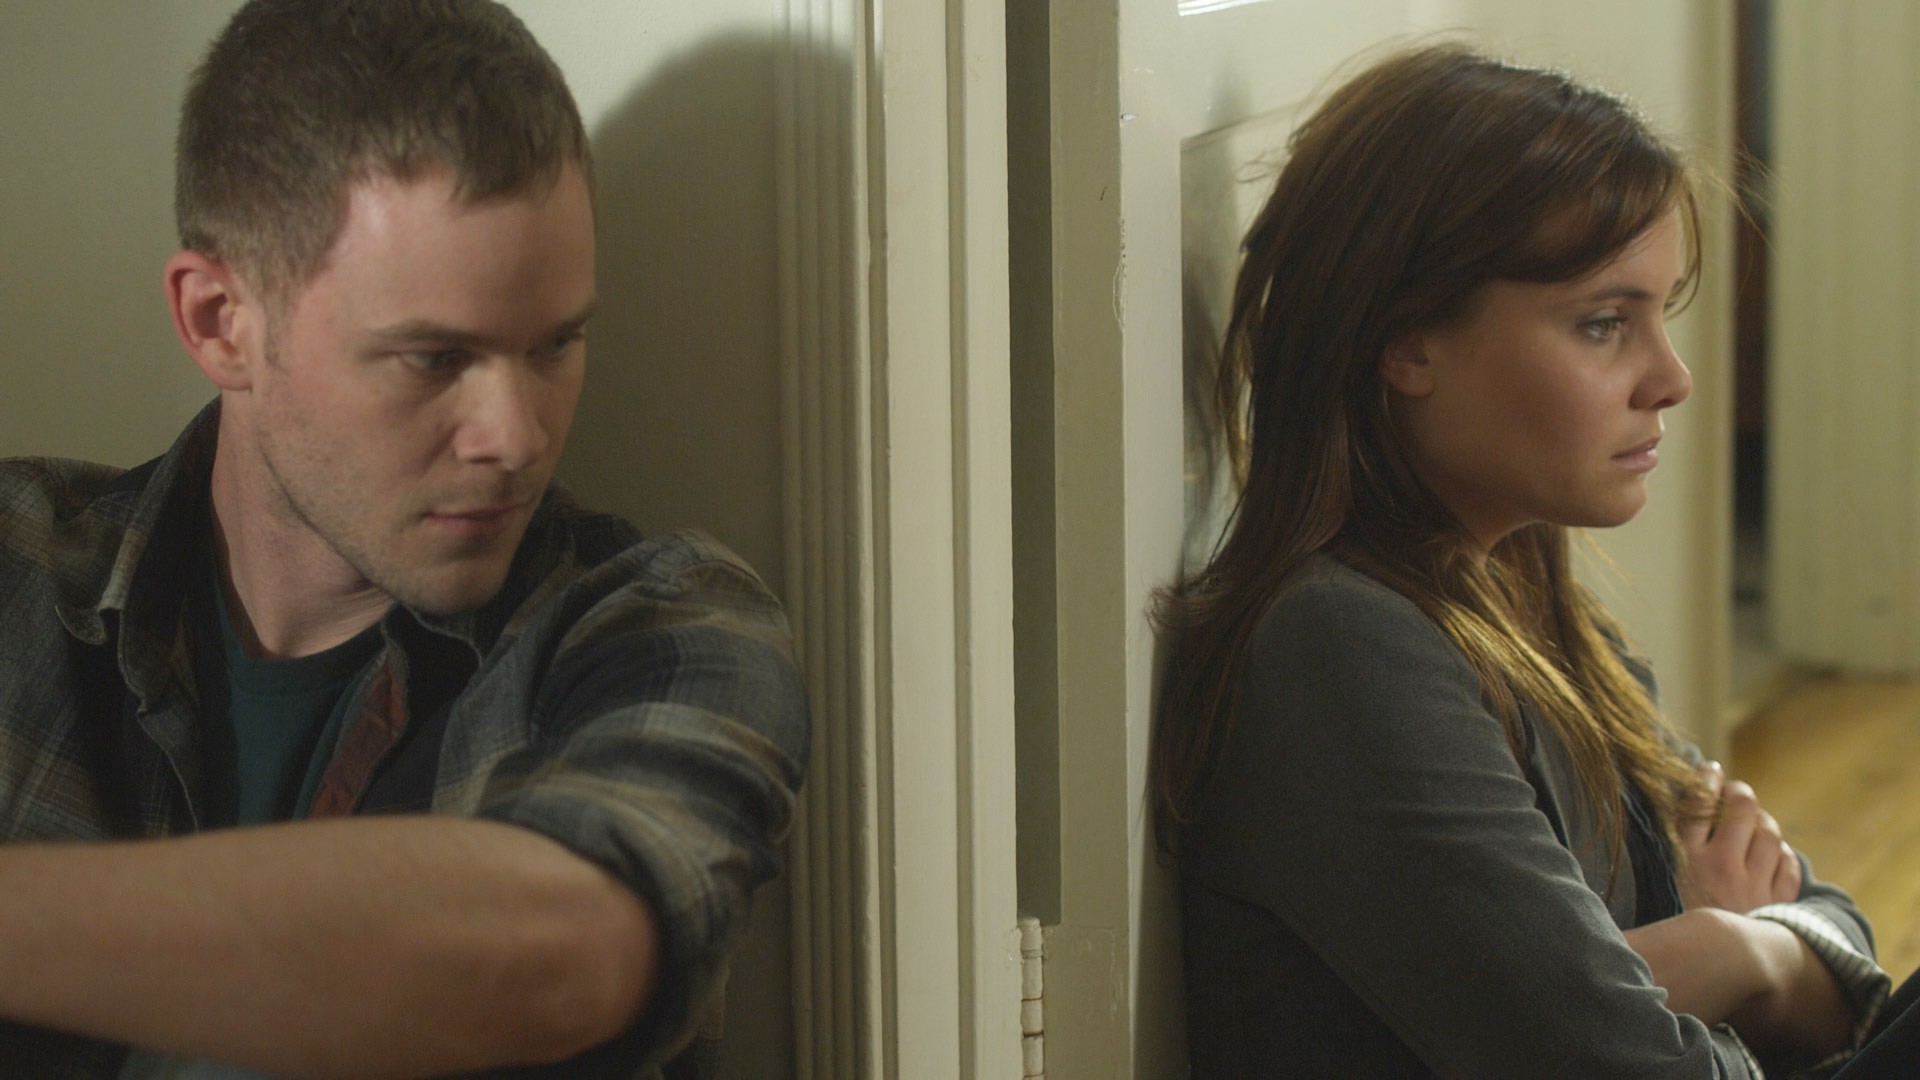 Aaron Ashmore stars as Eric and Leah Pipes stars as Carla in Tribeca Film's Conception (2012). Photo credit by Noah Rosenthal.